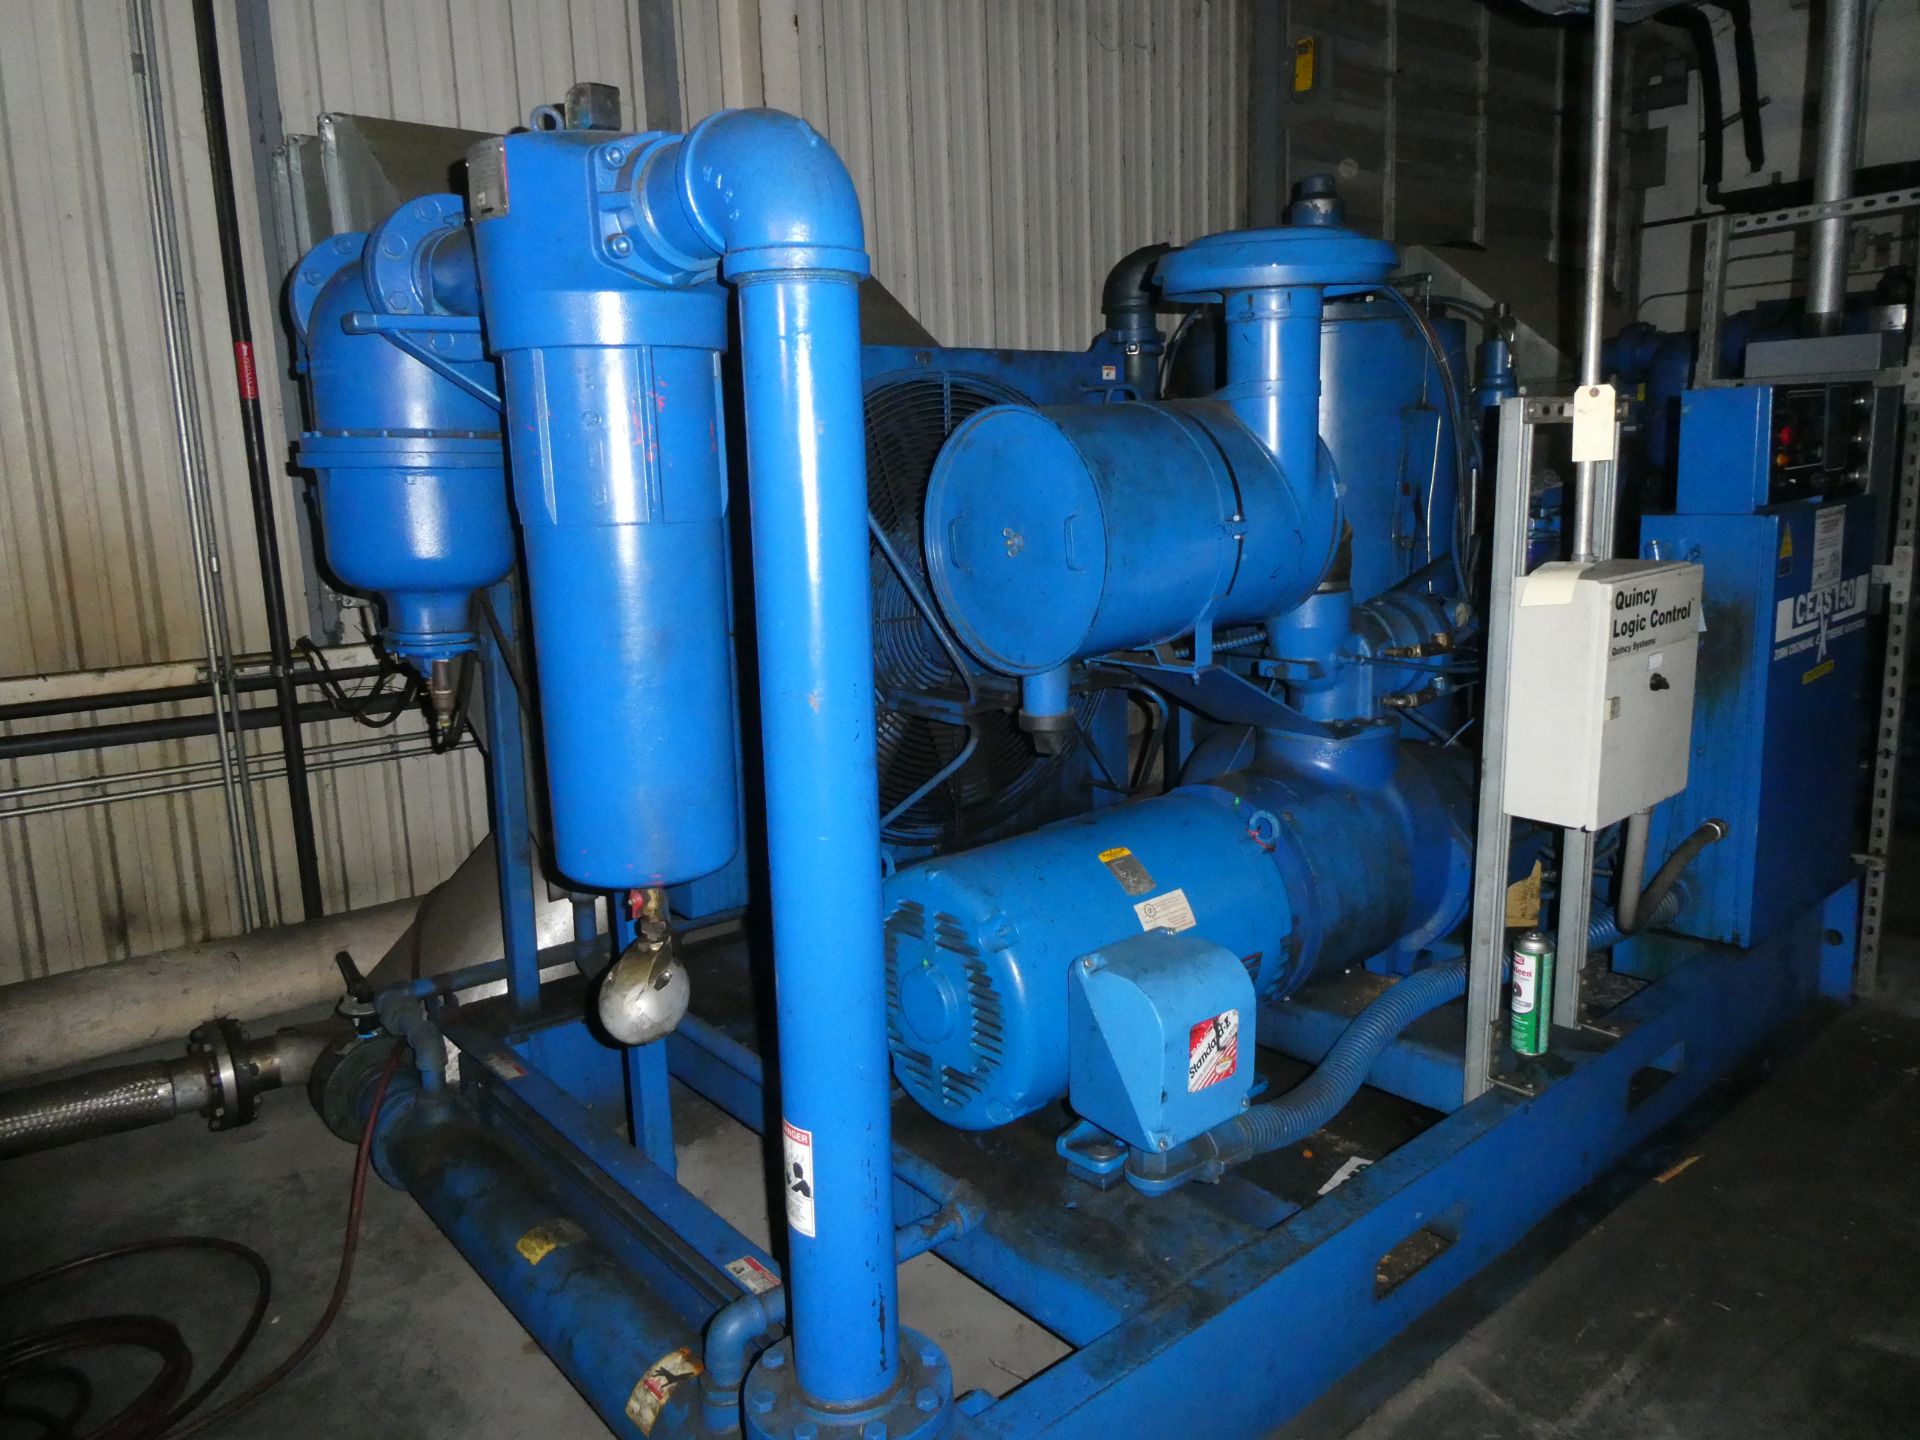 Quincy Model QSLP150ANA3C 150 HP Rotary Screw Compressor Package - Image 3 of 7